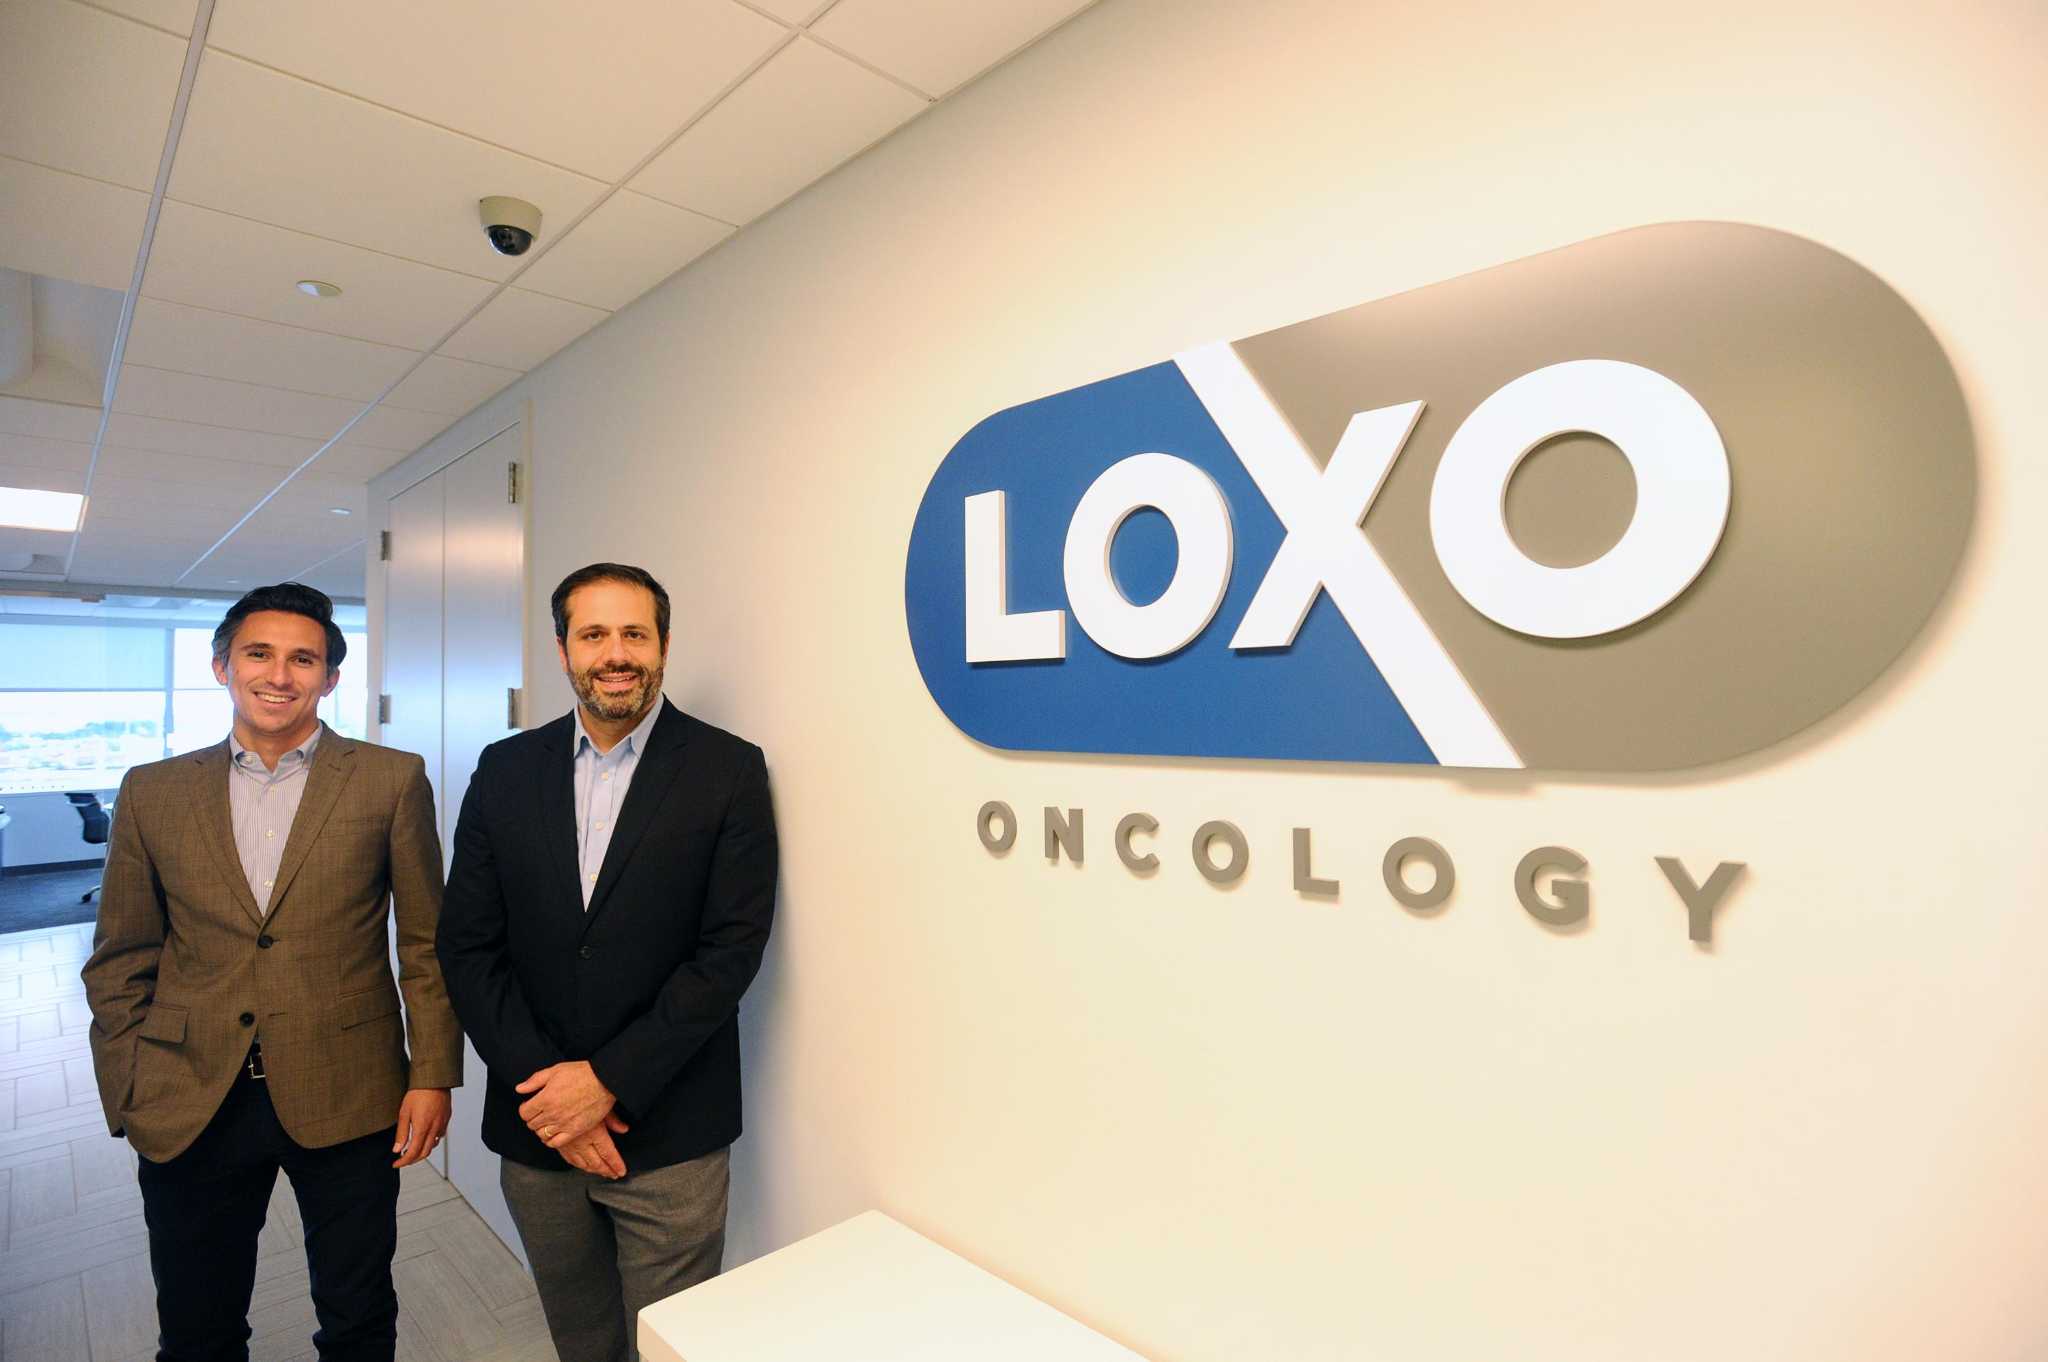 Loxo Oncology announces billion-dollar deal with Bayer - StamfordAdvocate2048 x 1362